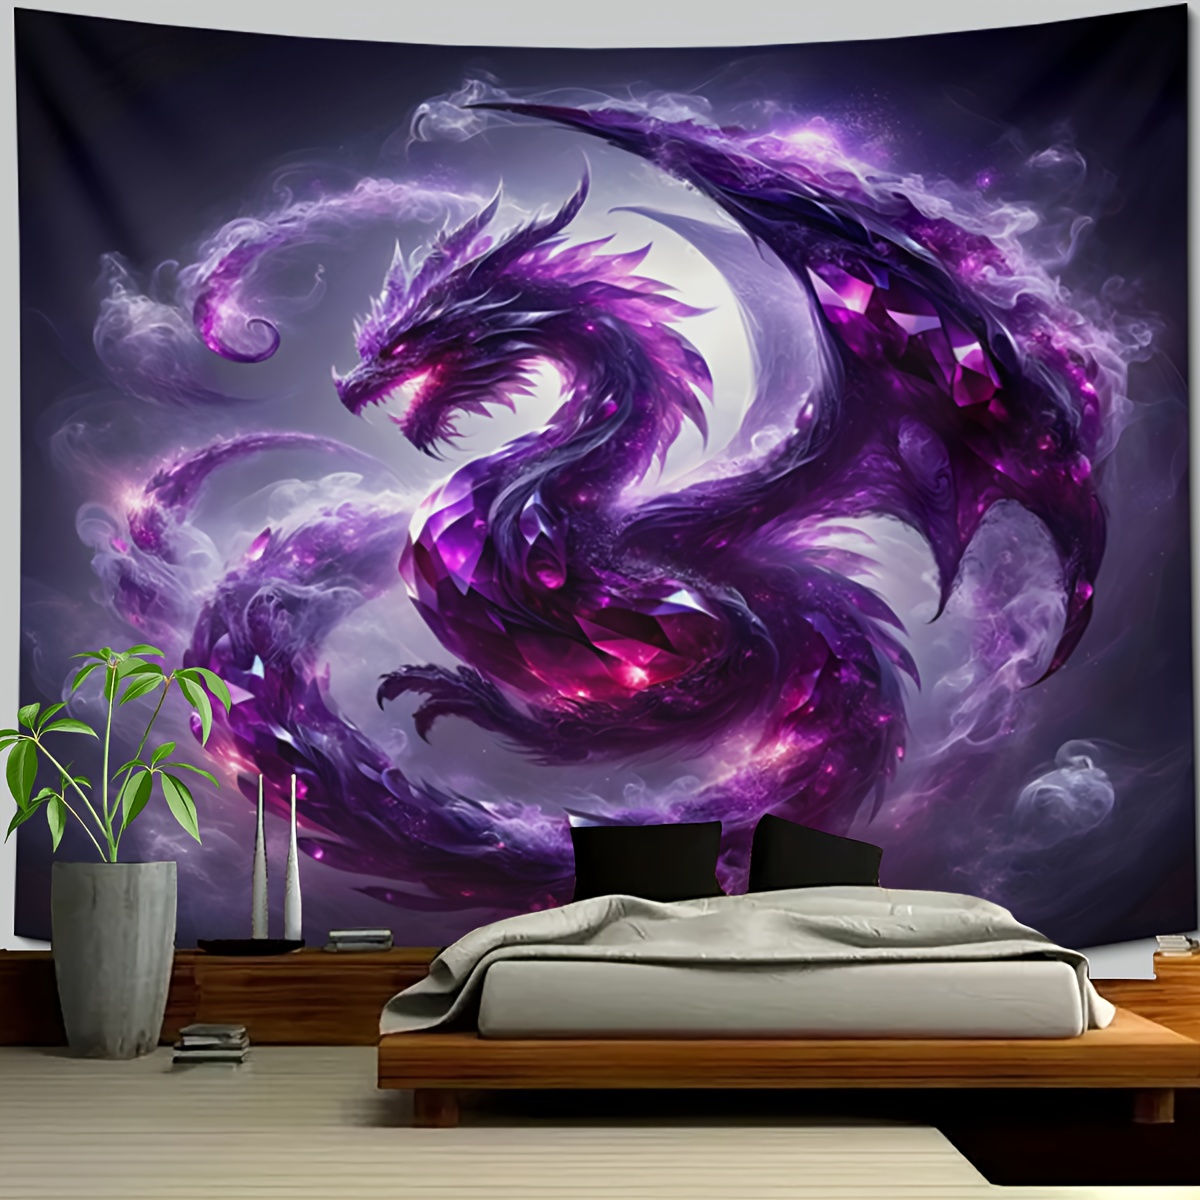 

1pc Purple Dragon Pattern Tapestry, Wall Hanging , For Bedroom Living Room Dormitory, Home Decor, With Free Accessories